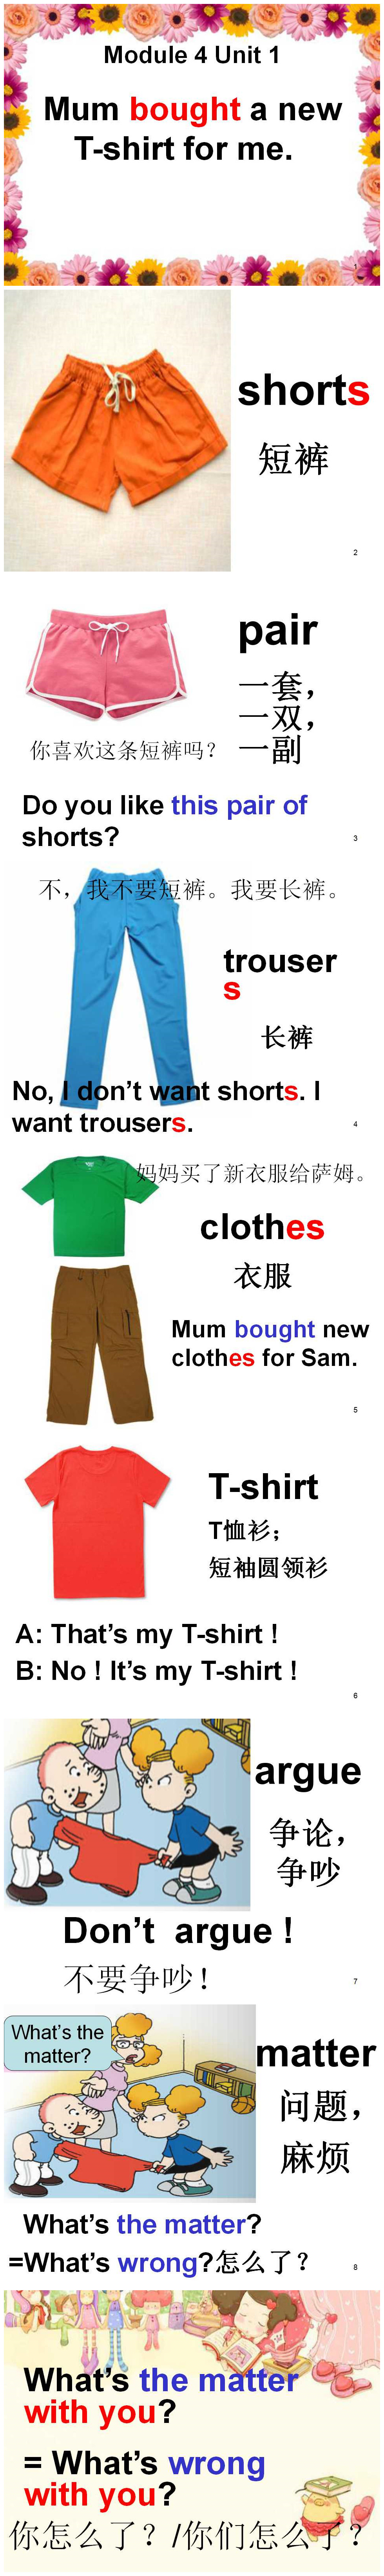 《Mum bought a new T-shirt for me》PPT课件3